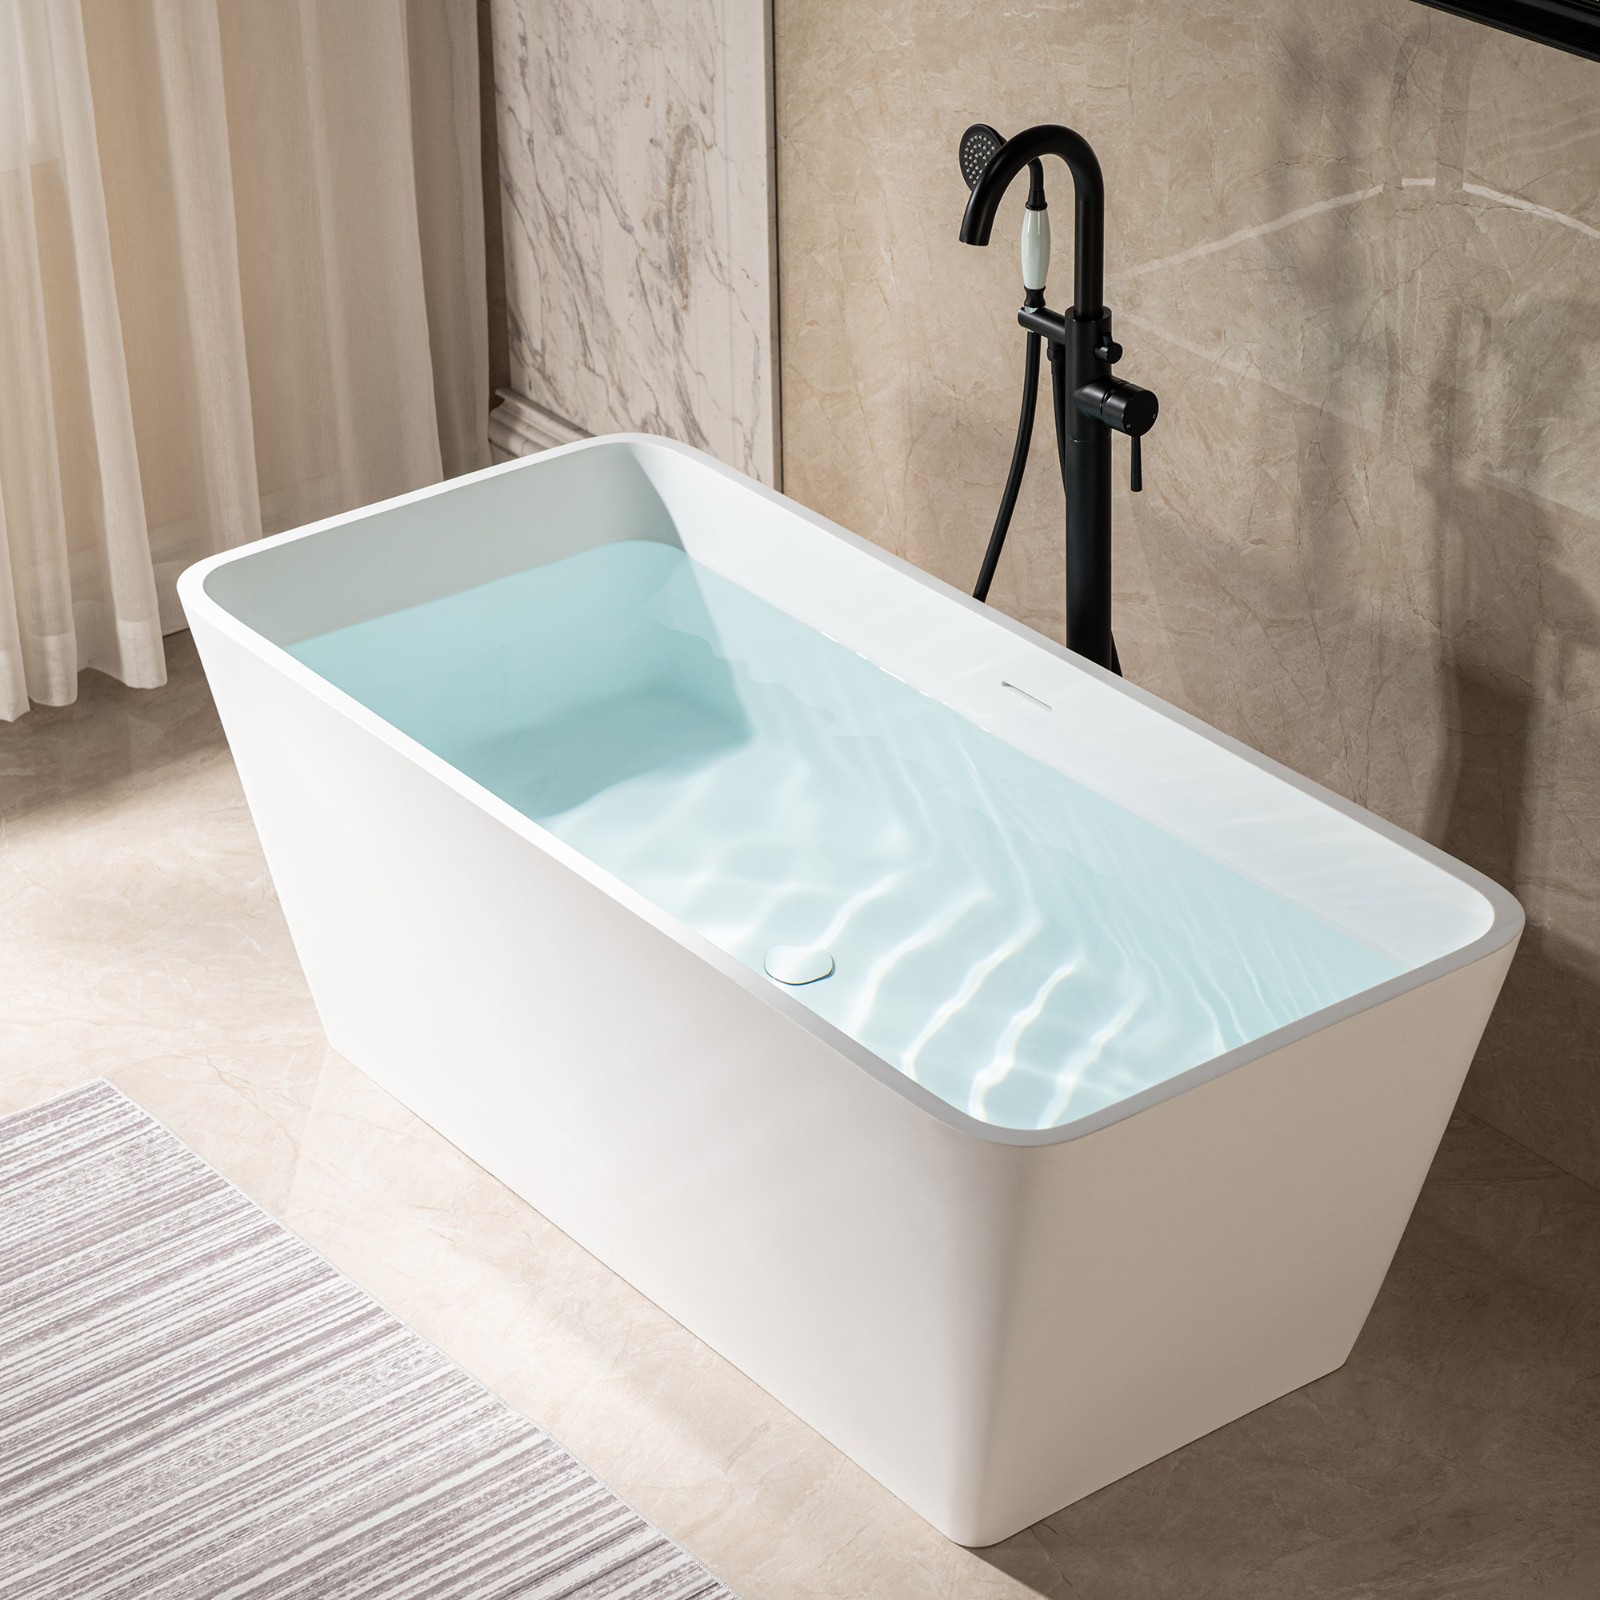  WOODBRIDGE 59 in. x 27.5 in. Luxury Contemporary Solid Surface Freestanding Bathtub in Matte White_2